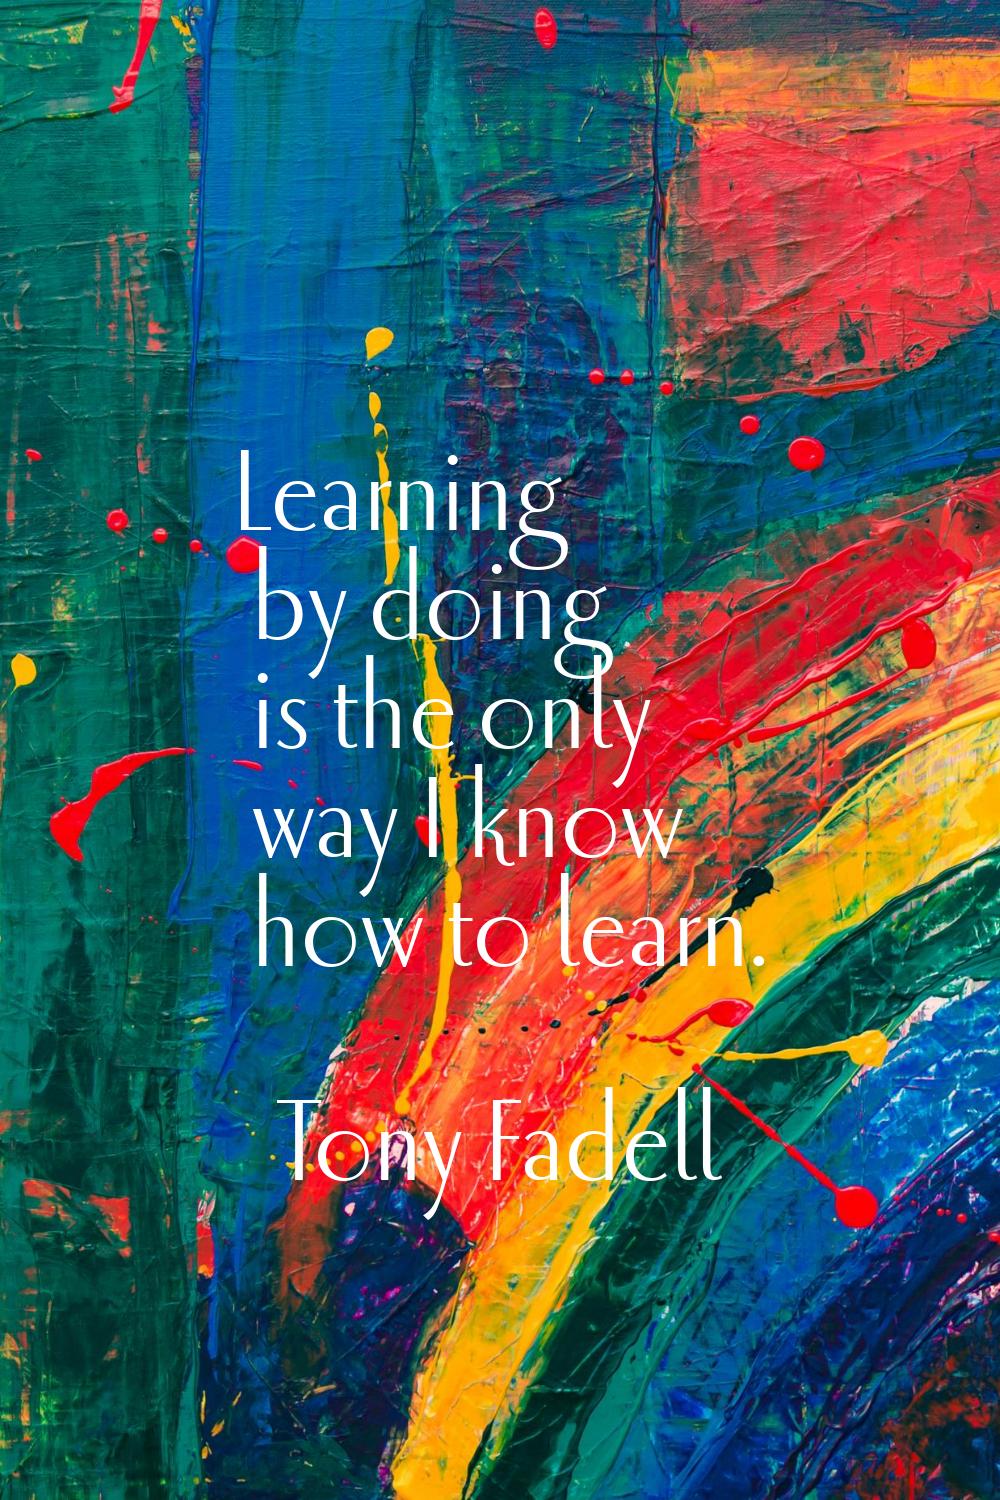 Learning by doing is the only way I know how to learn.